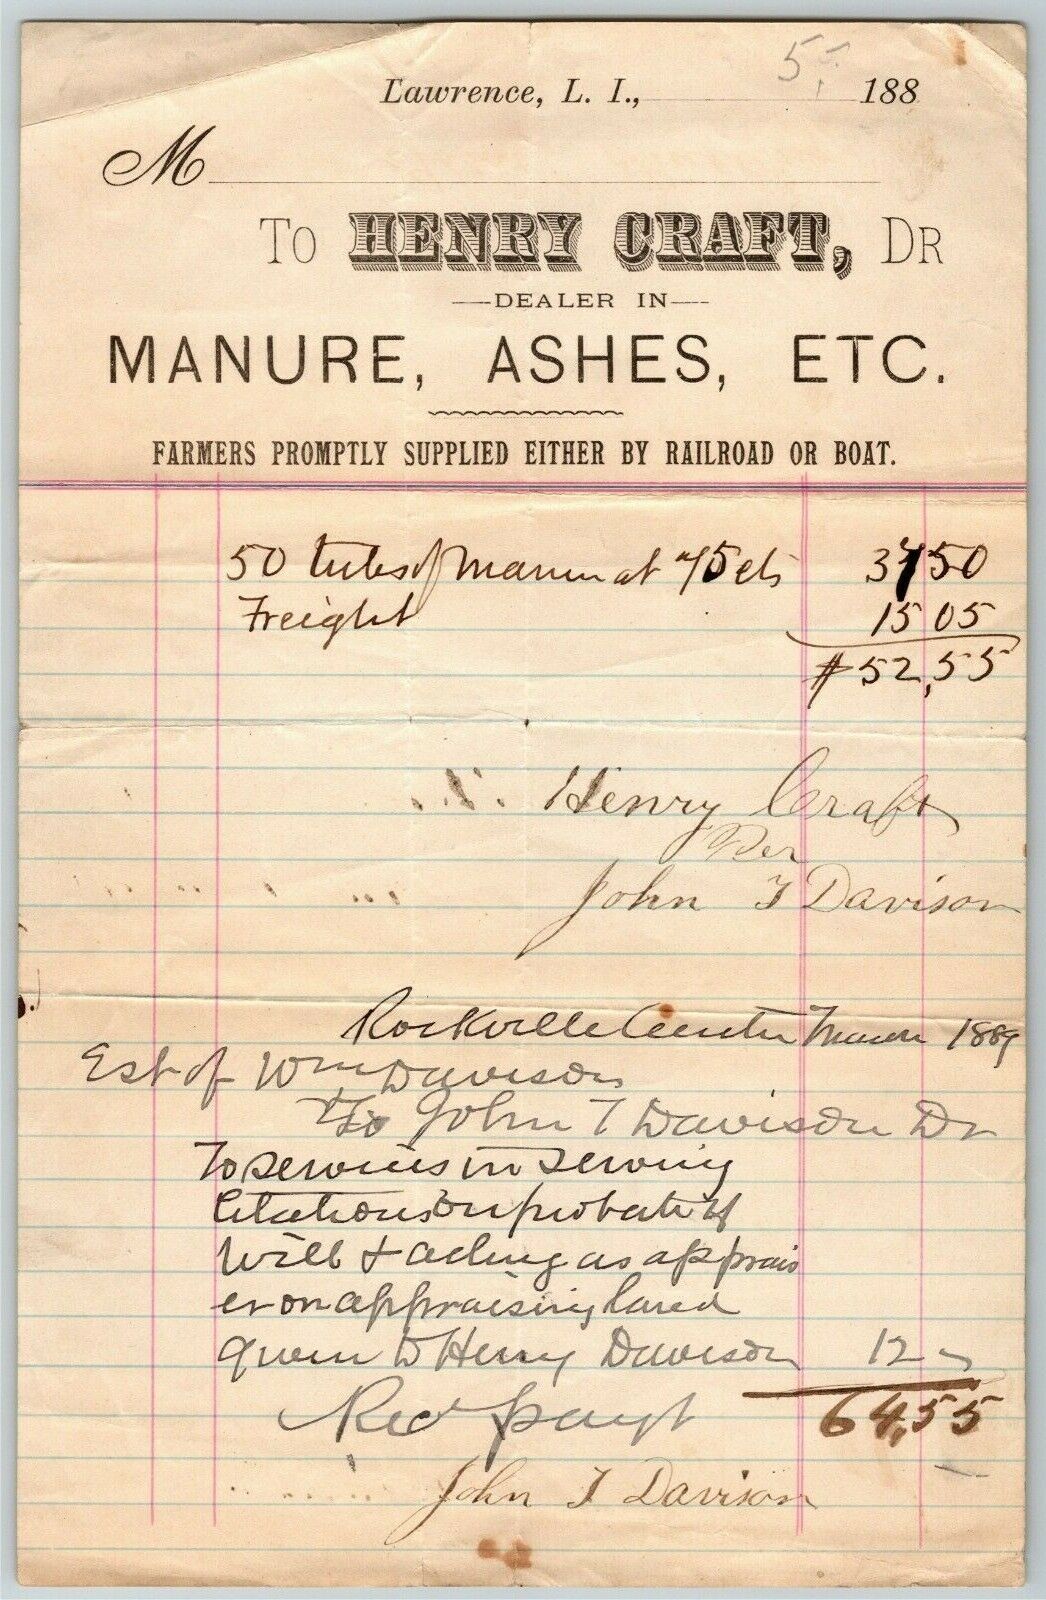 Lawrence LI NY Letterhead Billhead 1889 Henry Craft Manure Ashes by RR or Boat